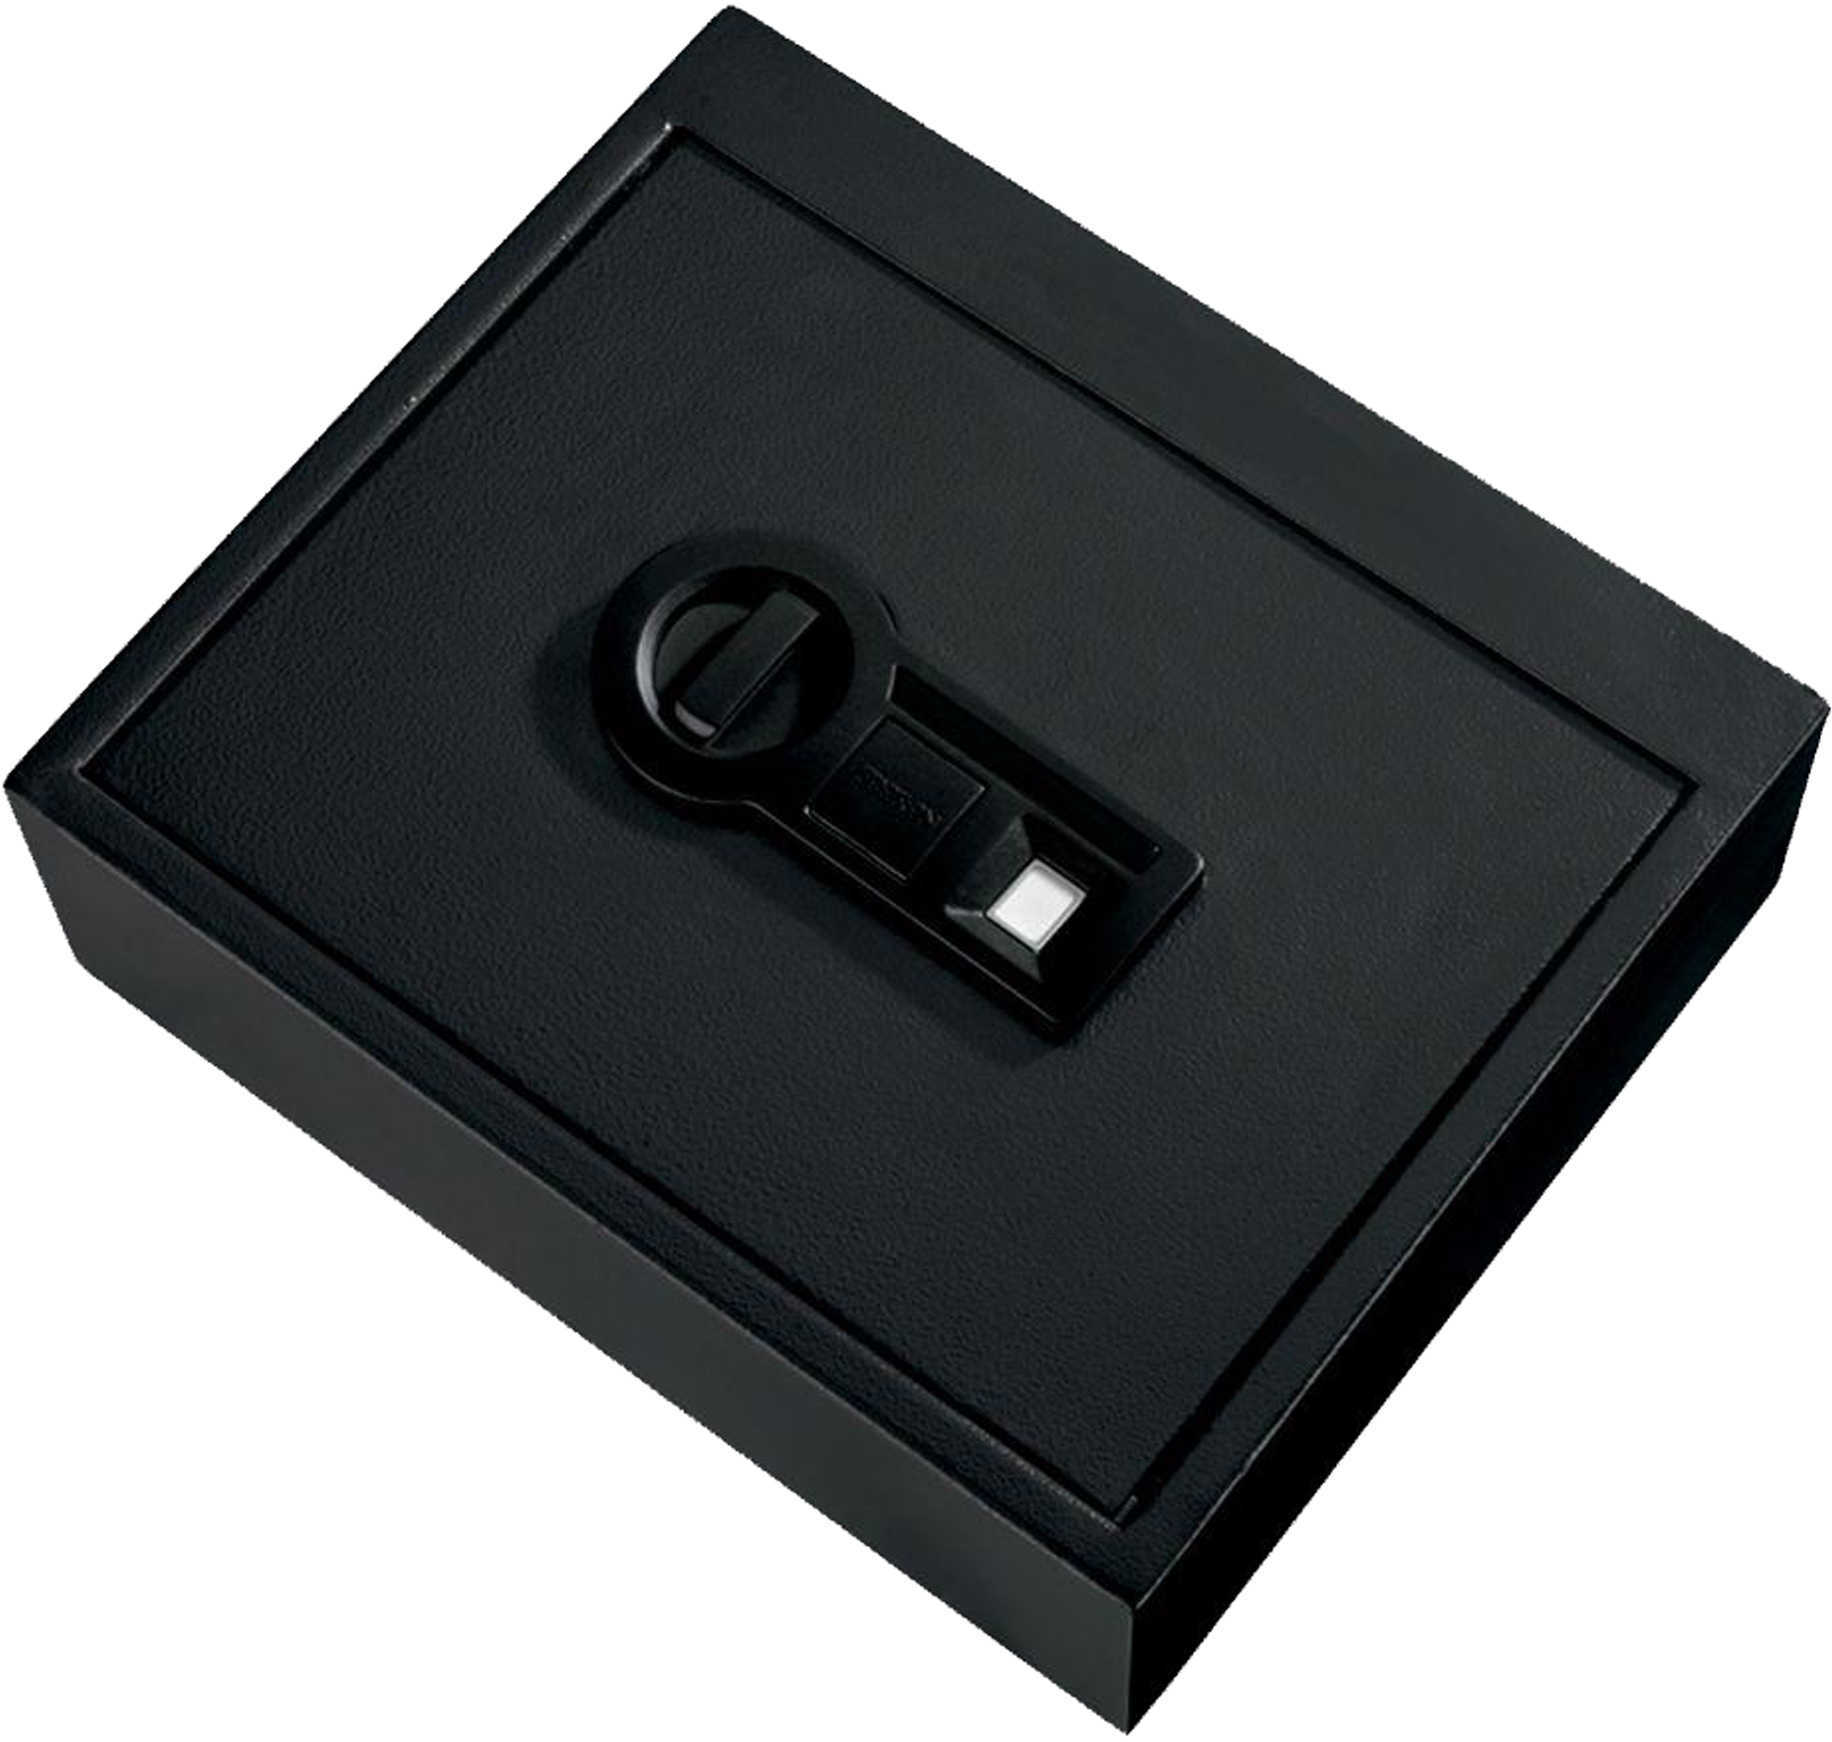 Stack-On Personal Safe Drawer with Biometric Lock, Black Md: PS-15-05-B